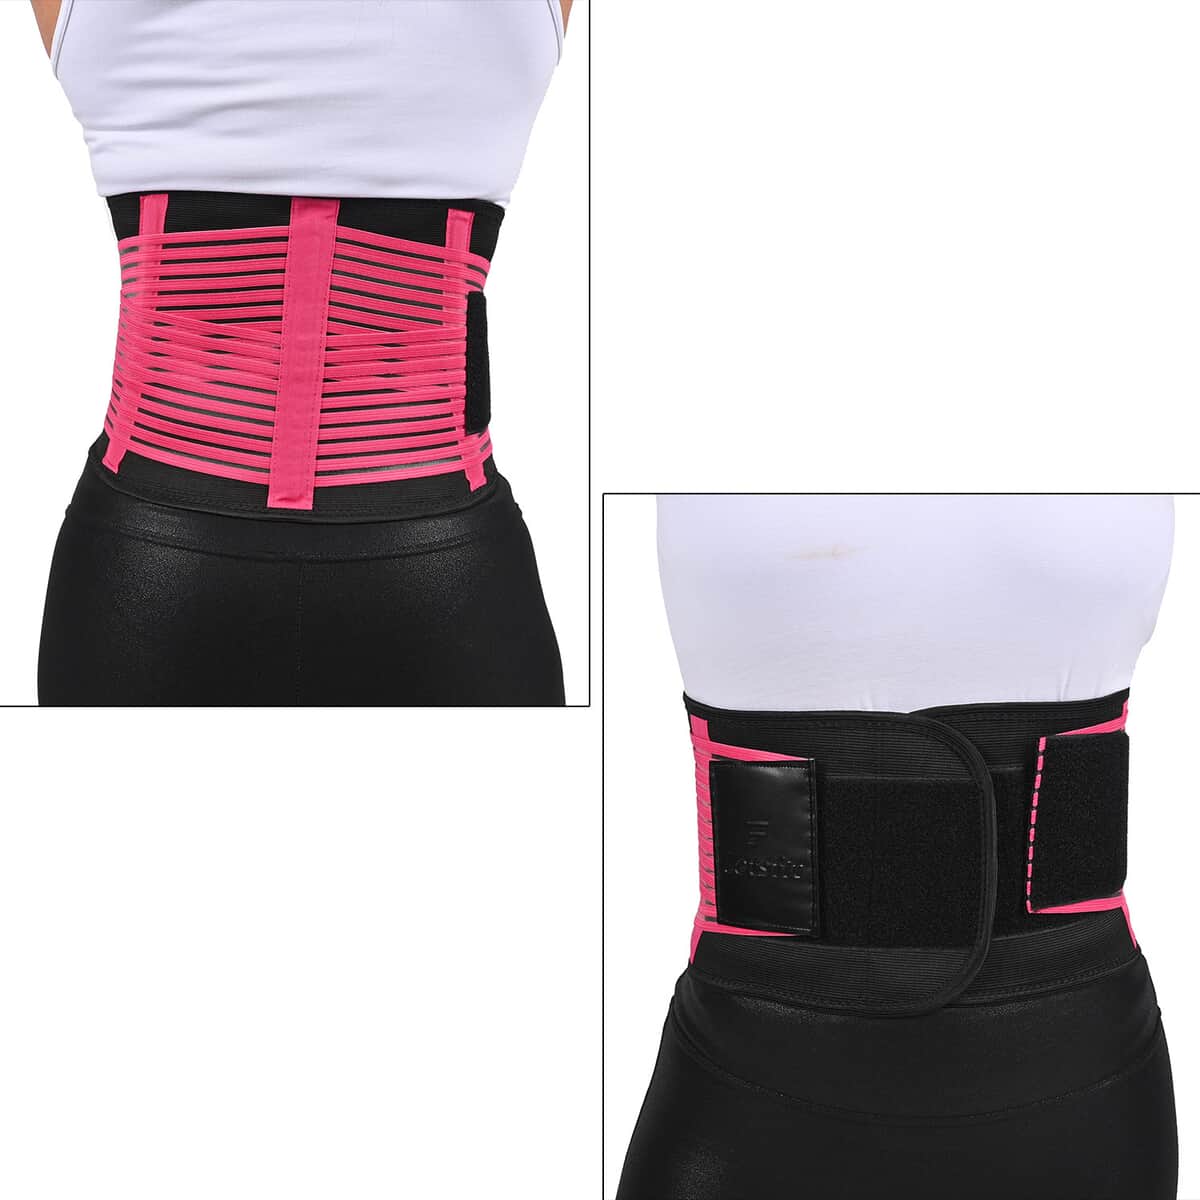 Letsfit Pink Waist Trainer Lumber Support Belt with Measuring Tape - S image number 5